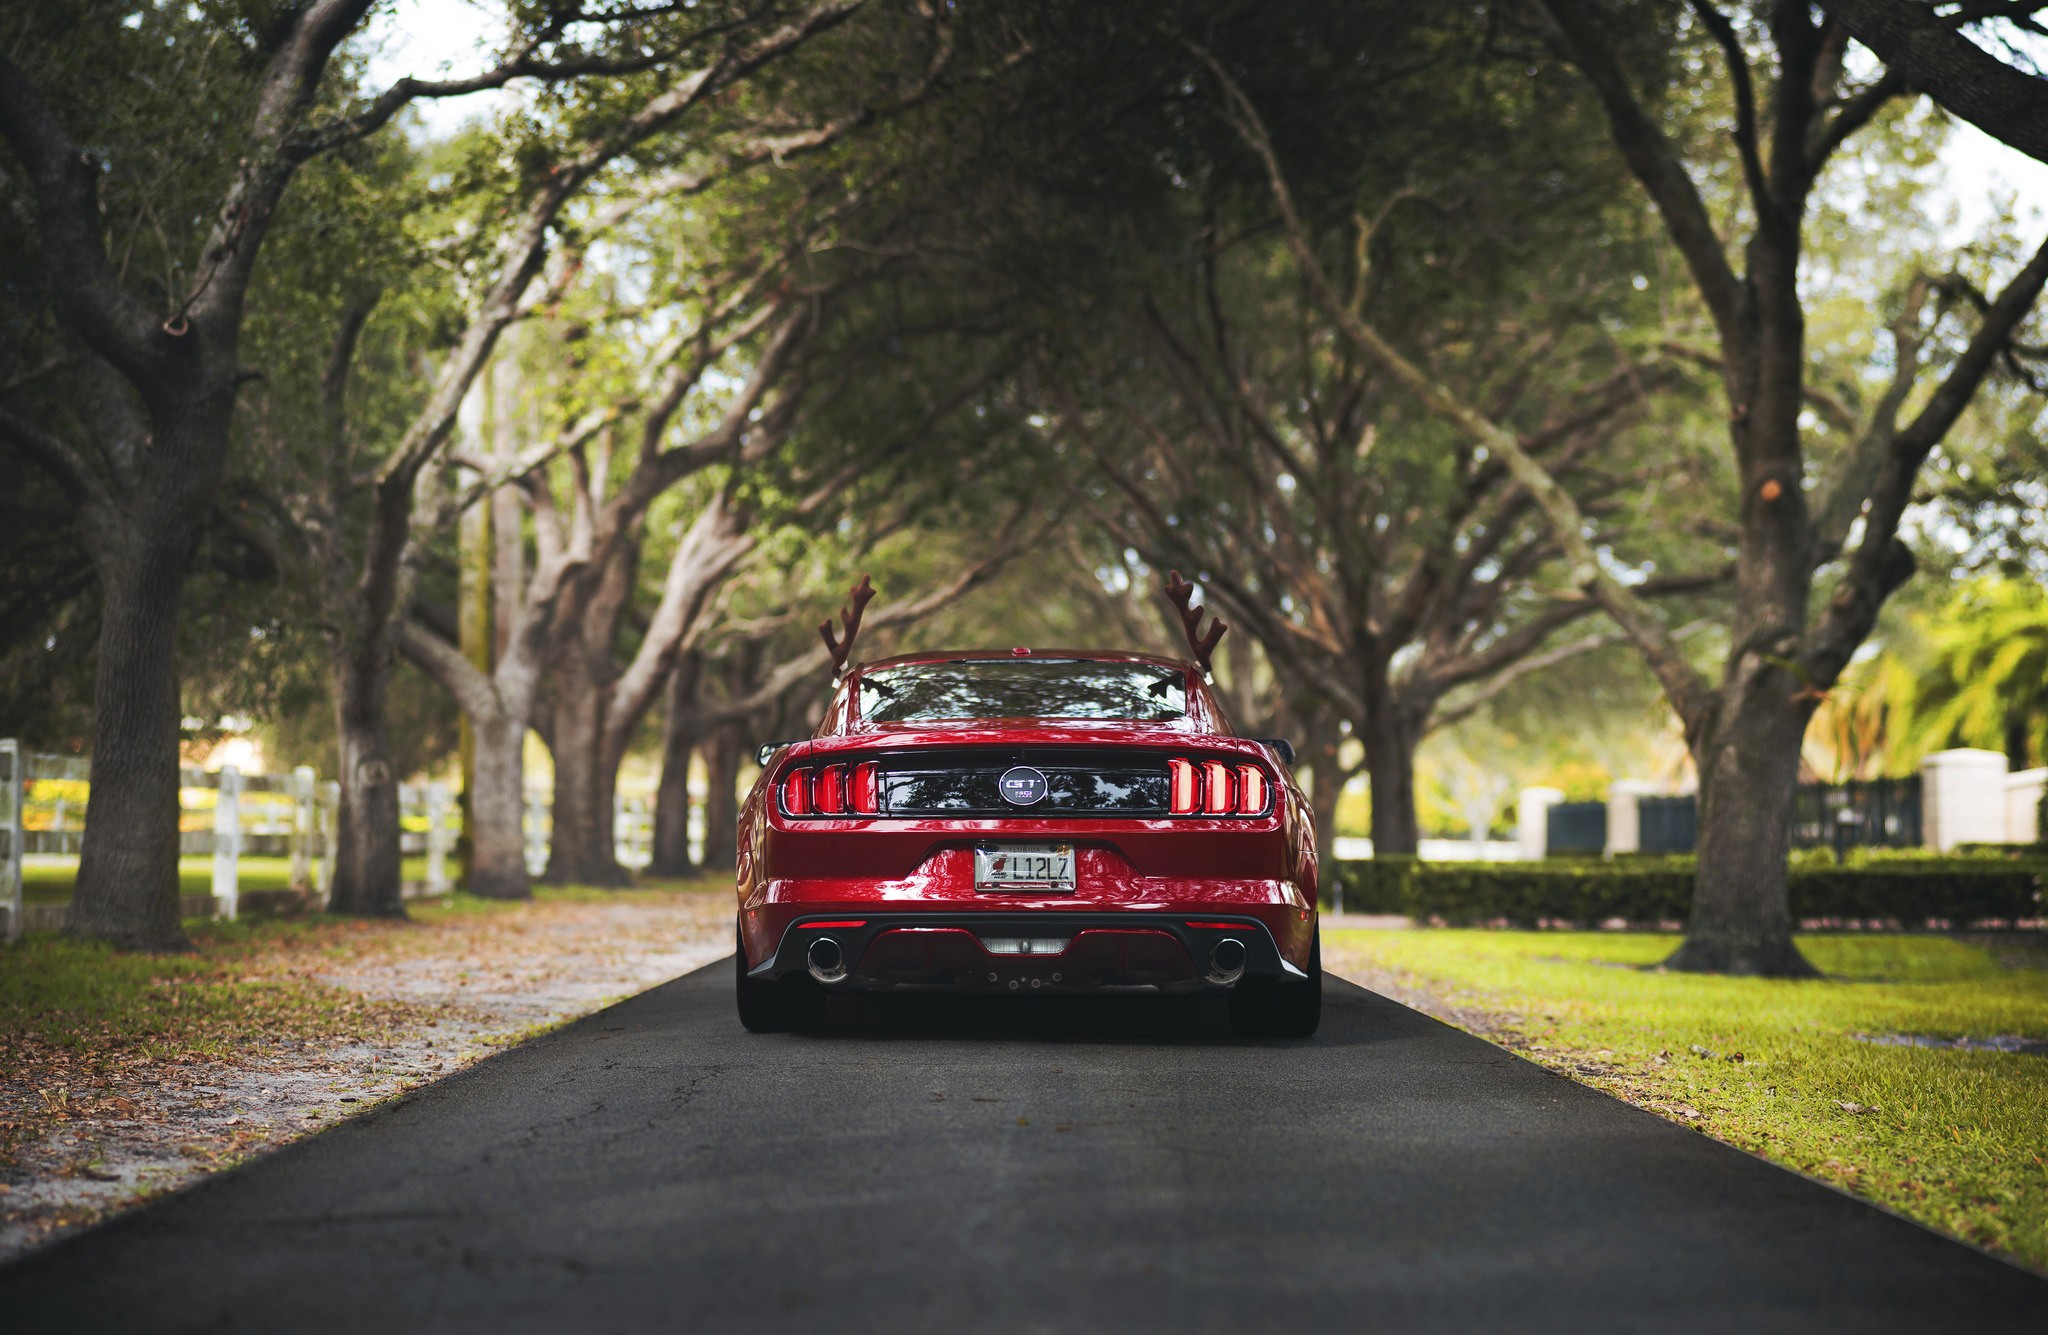 mustang Gt500, Ford, Nature, Rear View, Ford Mustang Shelby, Muscle Cars Wallpaper